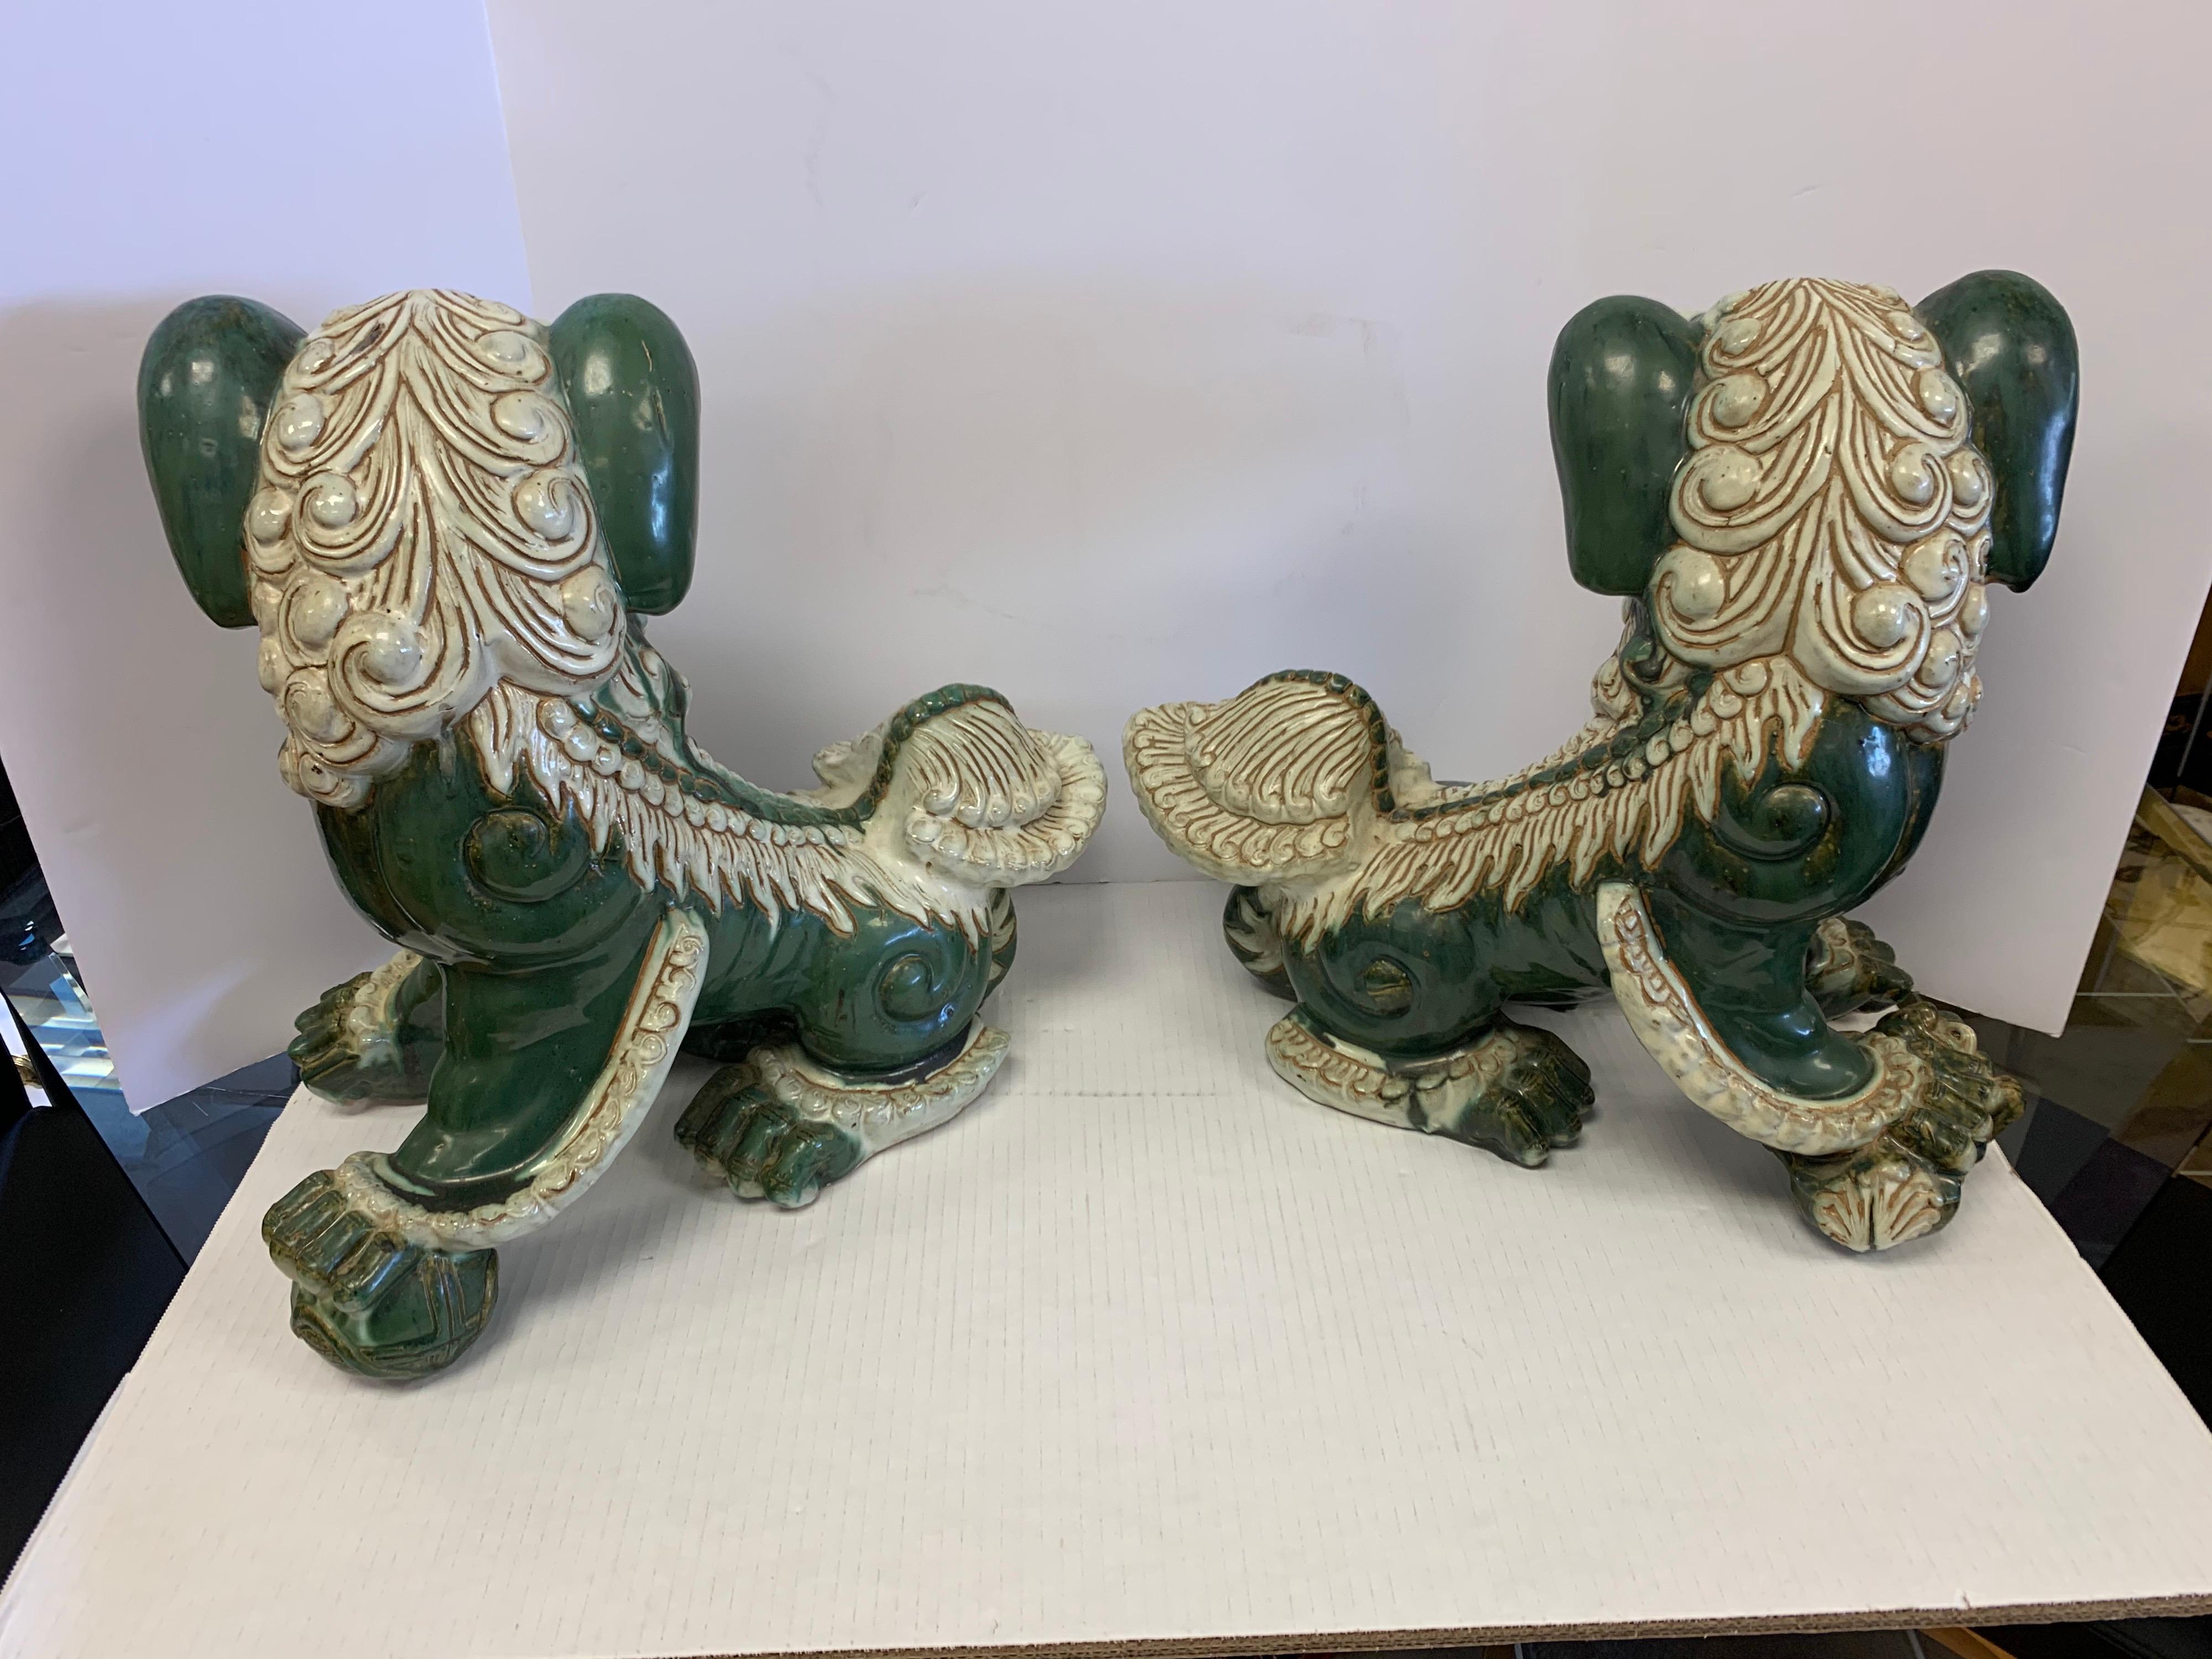 Extra-Large Pair of Chinese Glazed Porcelain Foo Dogs Sculptures 5